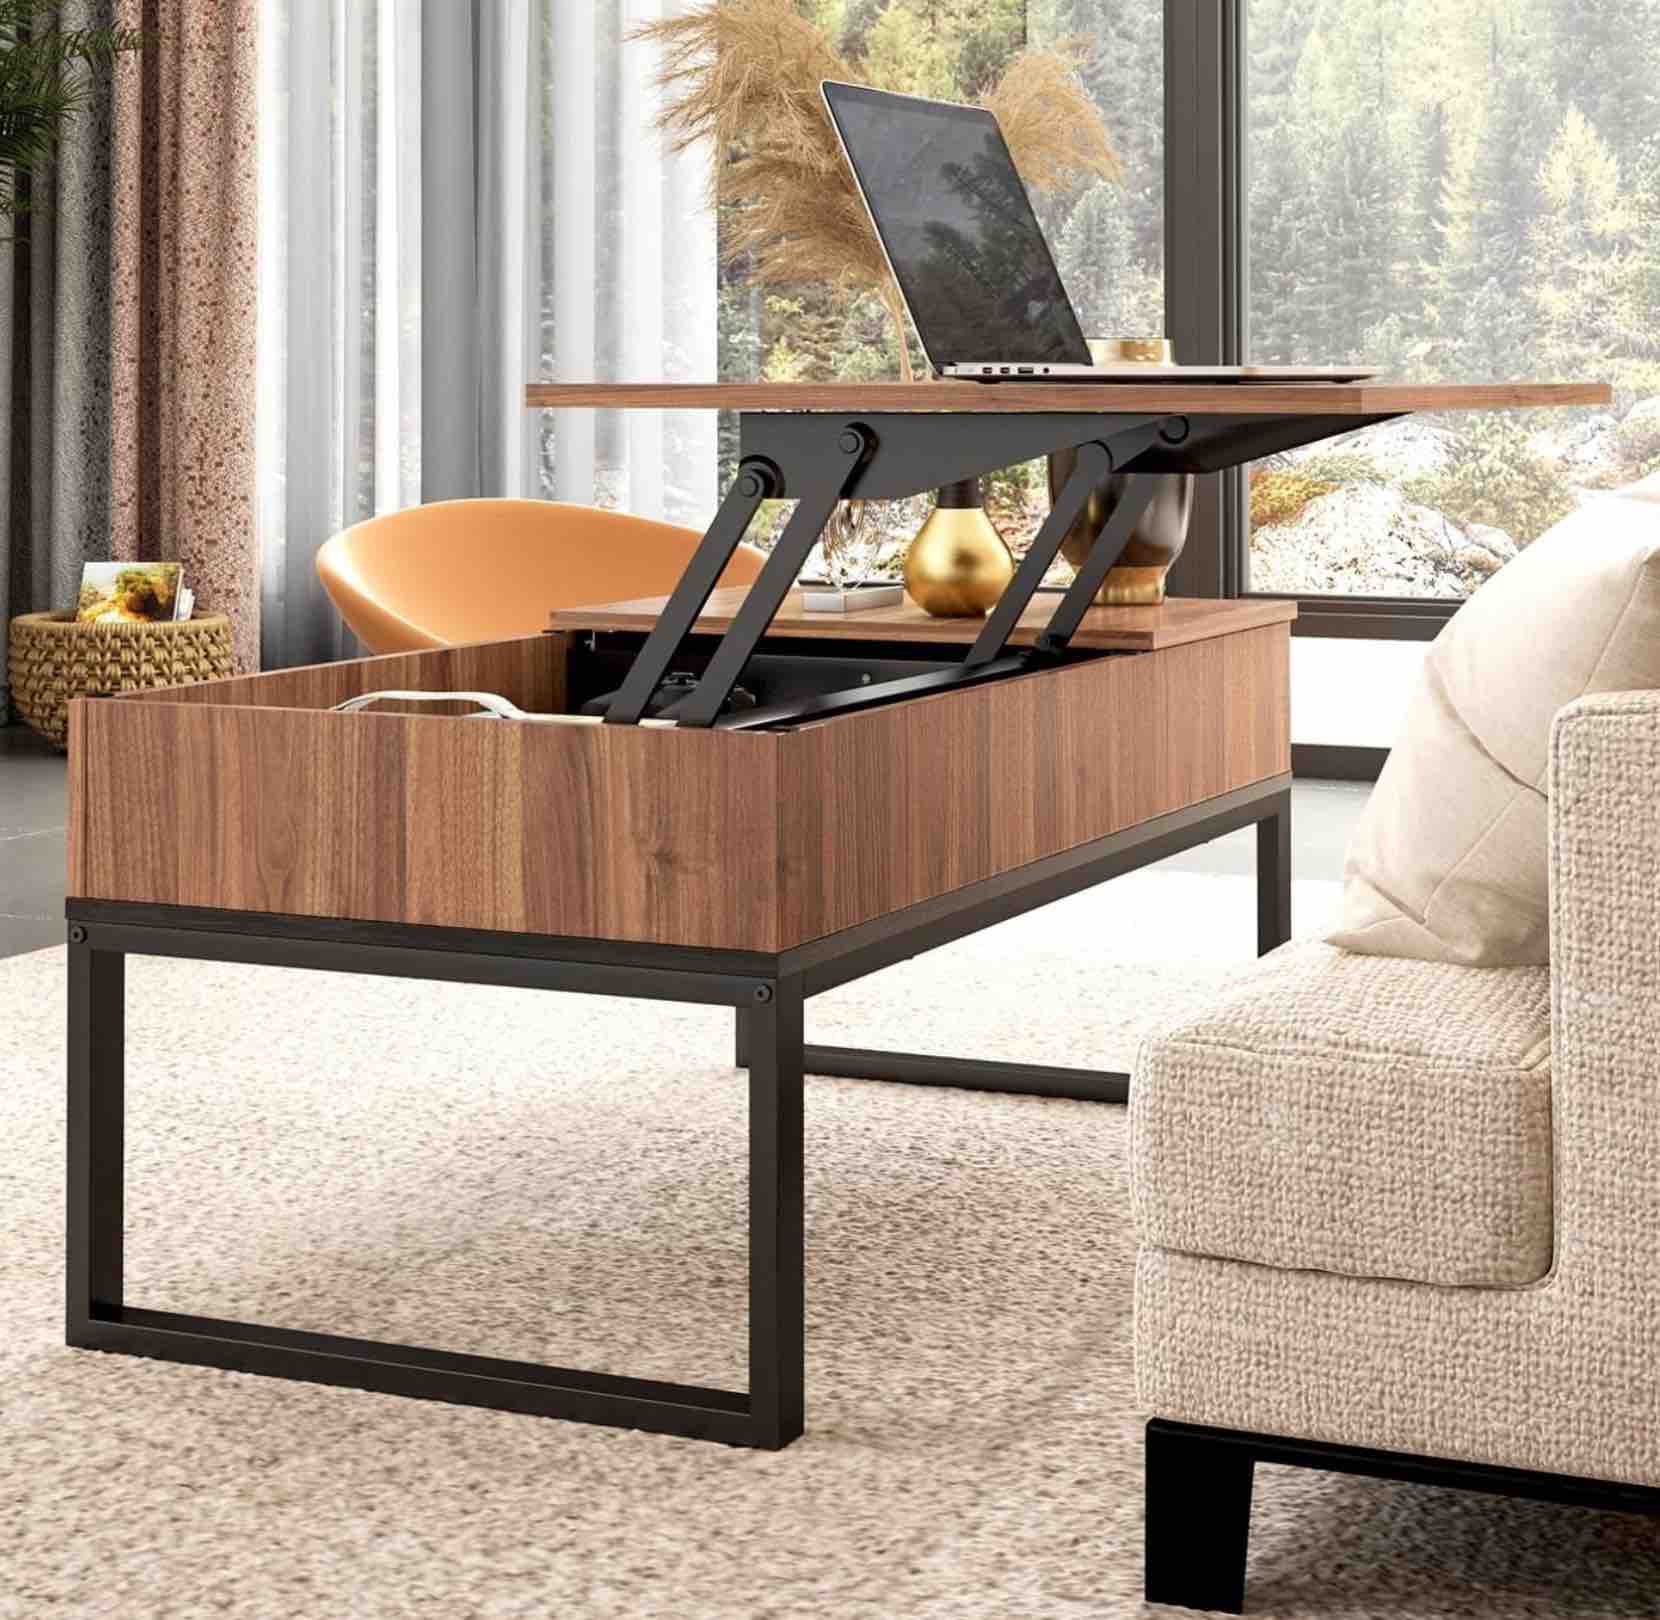 wlive-pop-up-coffee-table-with-hidden-storage-compartments-2